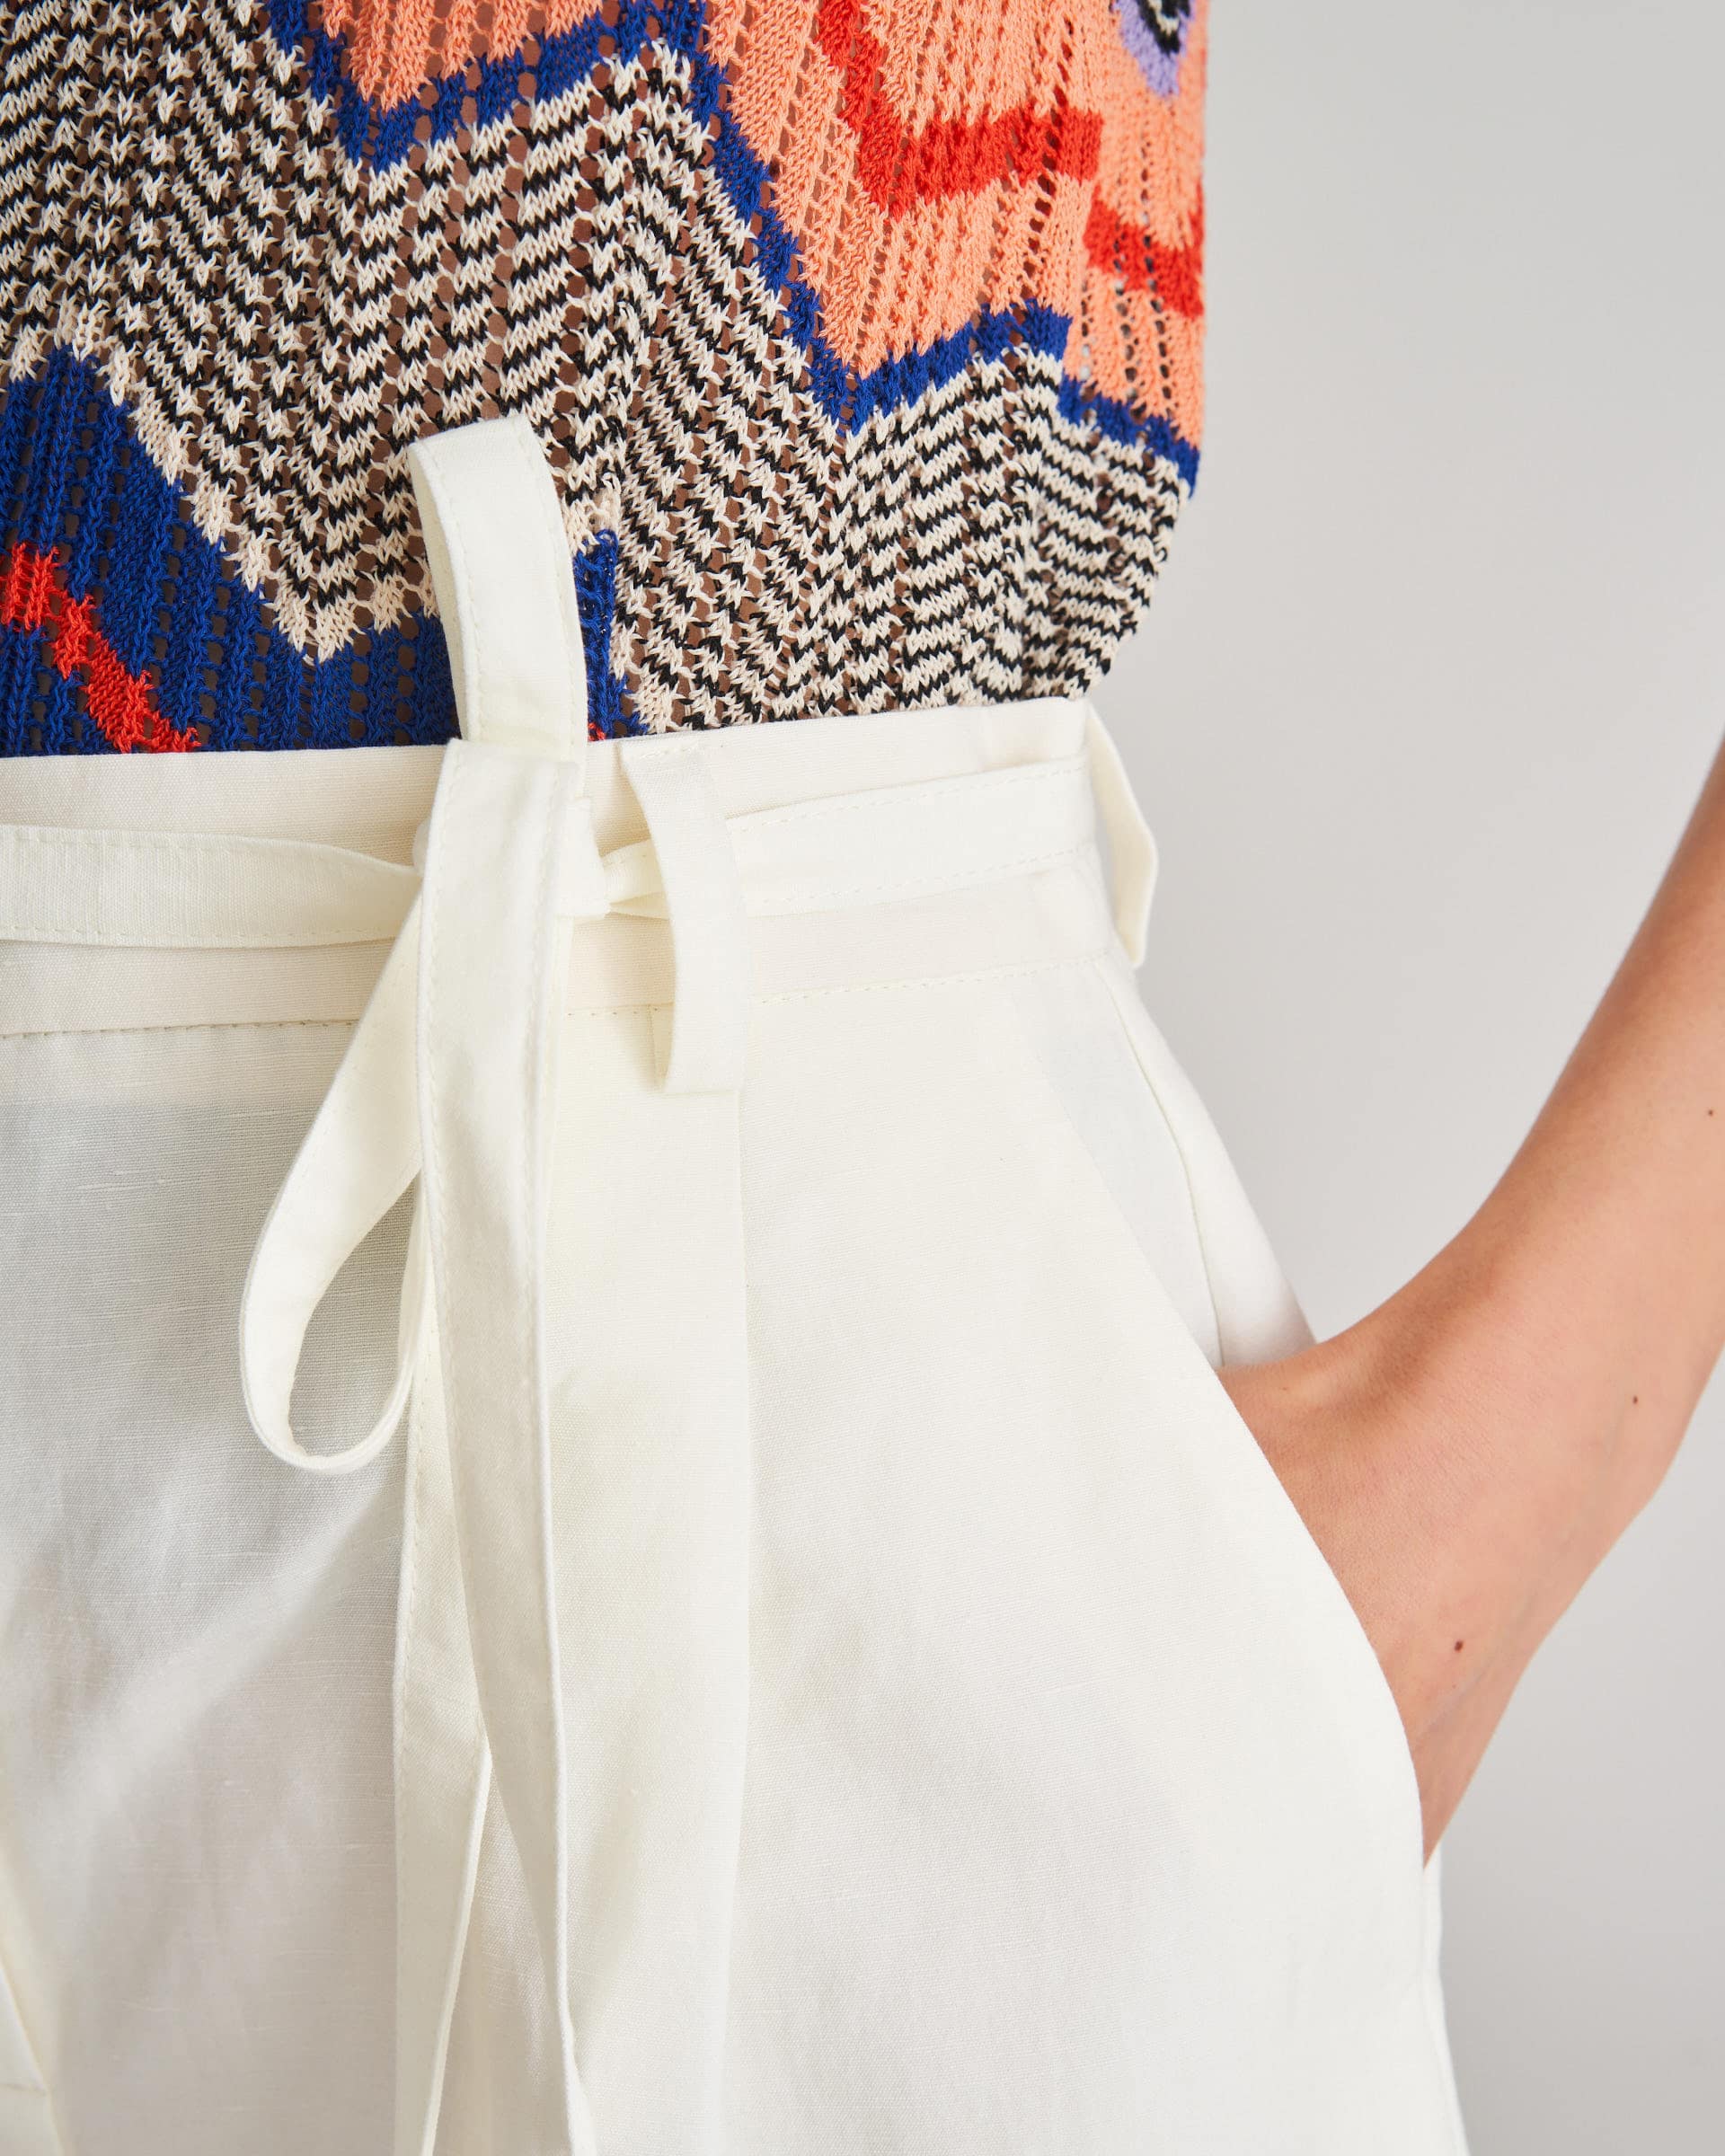 The Market Store | Short In Cotton Linen With Belt